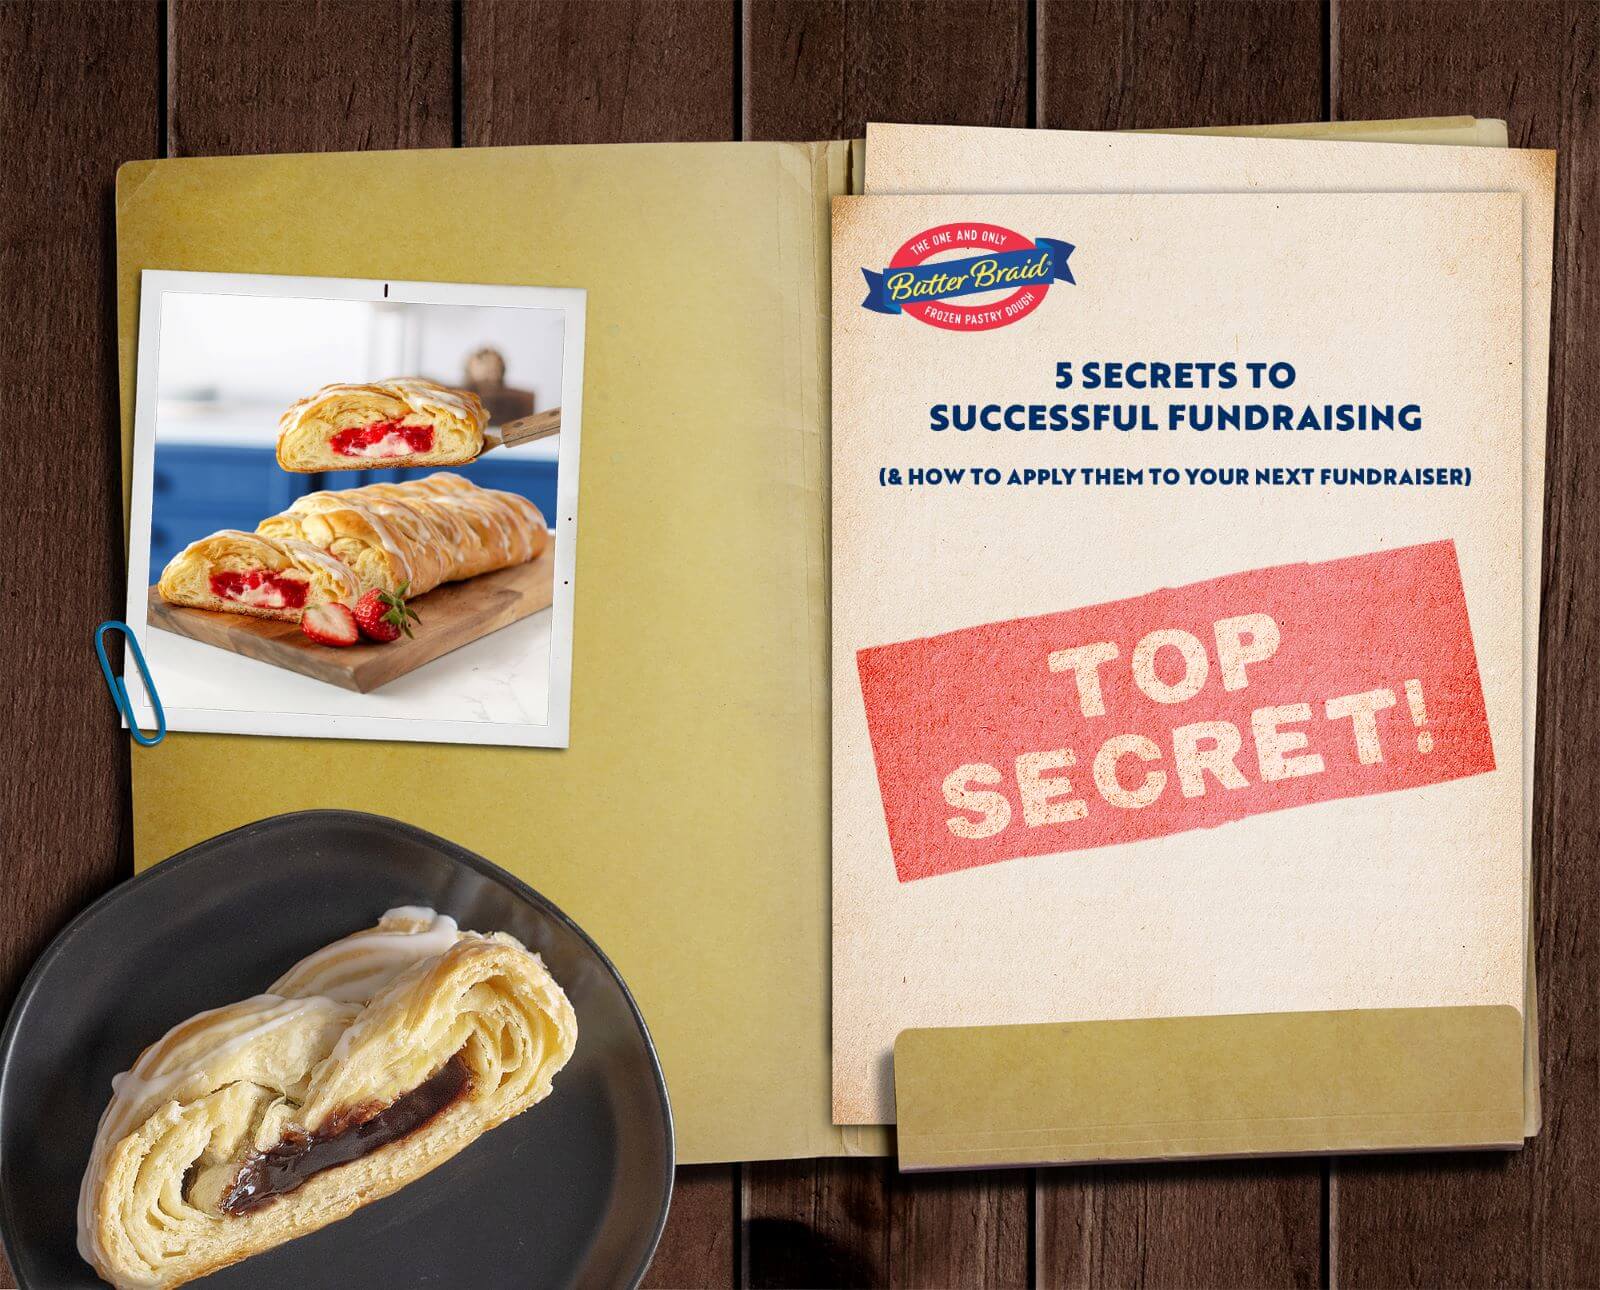 An image of an open manila folder. On the left is a picture of a Strawberry & Cream Cheese pastry paperclipped to the folder. On the right are several pages stacked together. The top one has the BBP logo on it and a stamp that reads "Top Secret". Also on this page is the title "5 Secrets to Successful Fundraising (& How to Apply Them to Your Next Fundraiser)". A slice of a Chocolate pastry is on a plate at the bottom of the image.